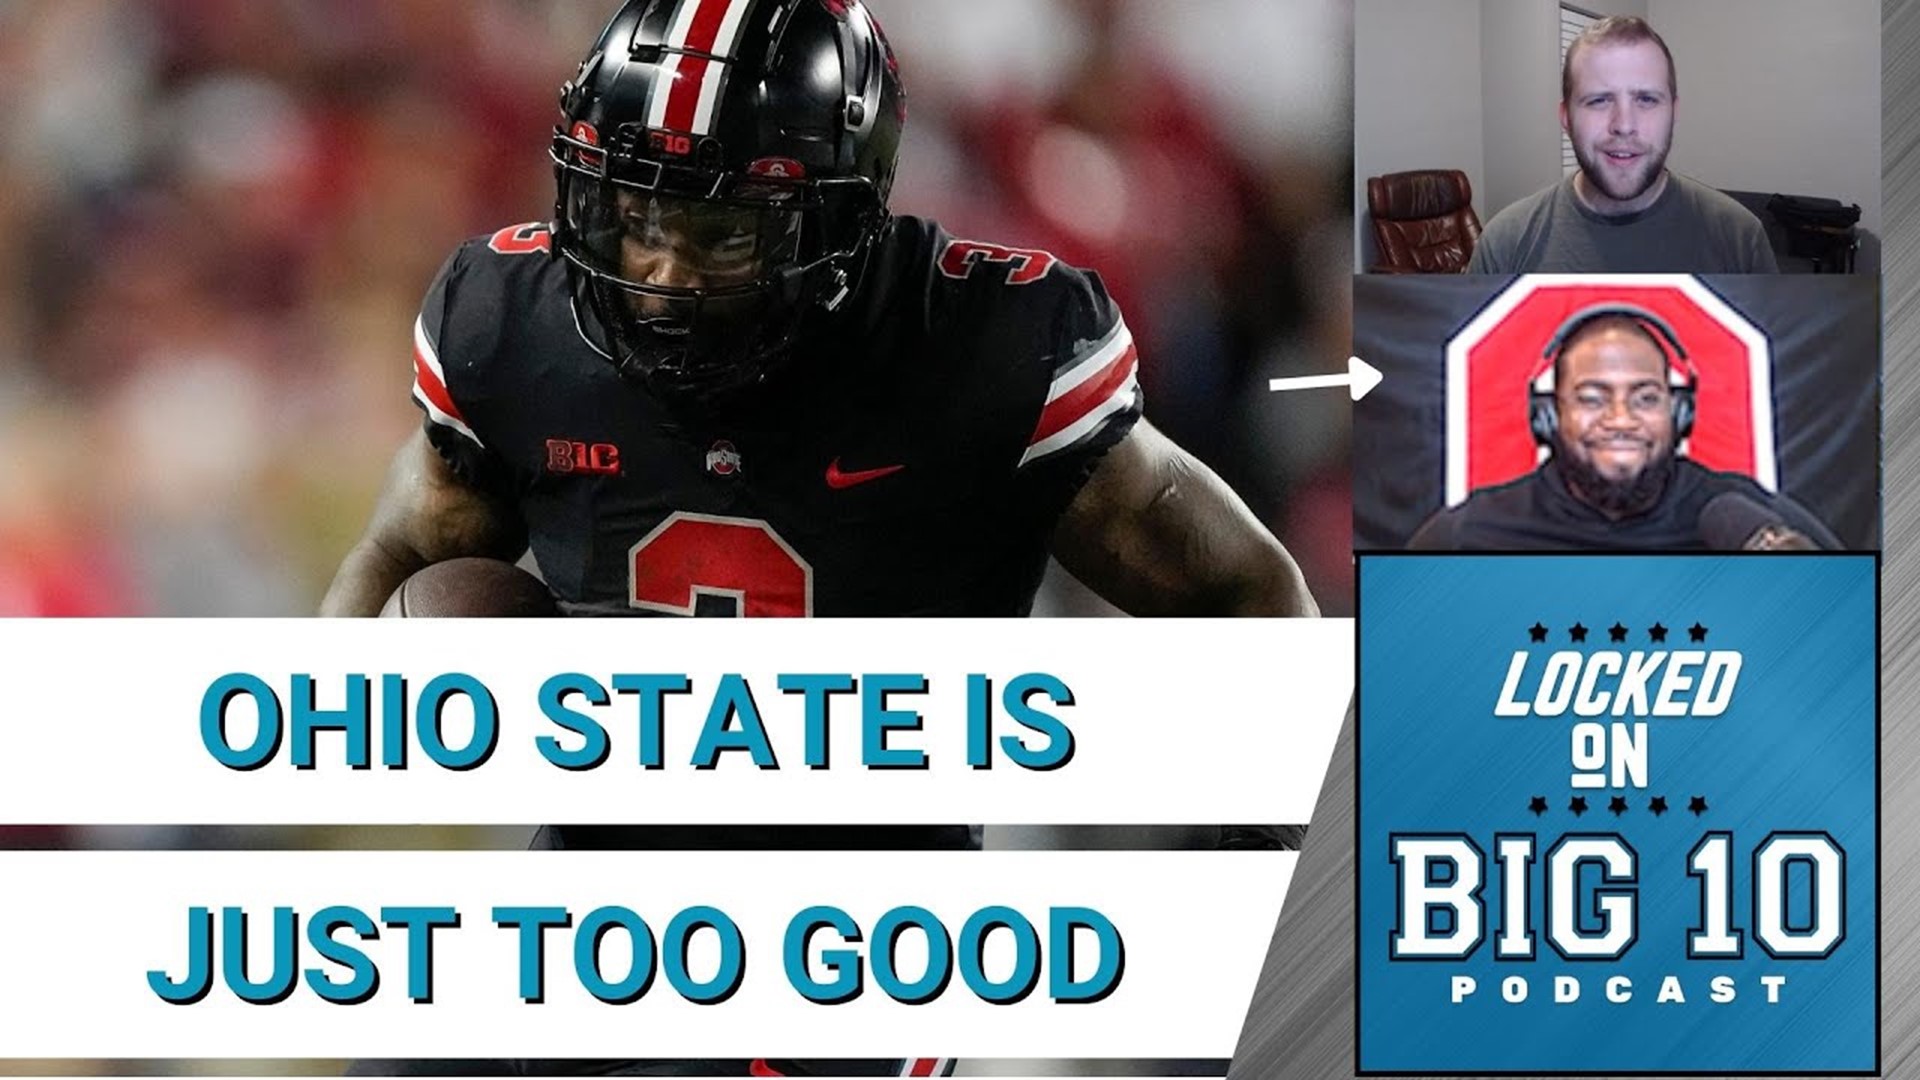 Should Ohio State Be Afraid of Anyone Anymore?